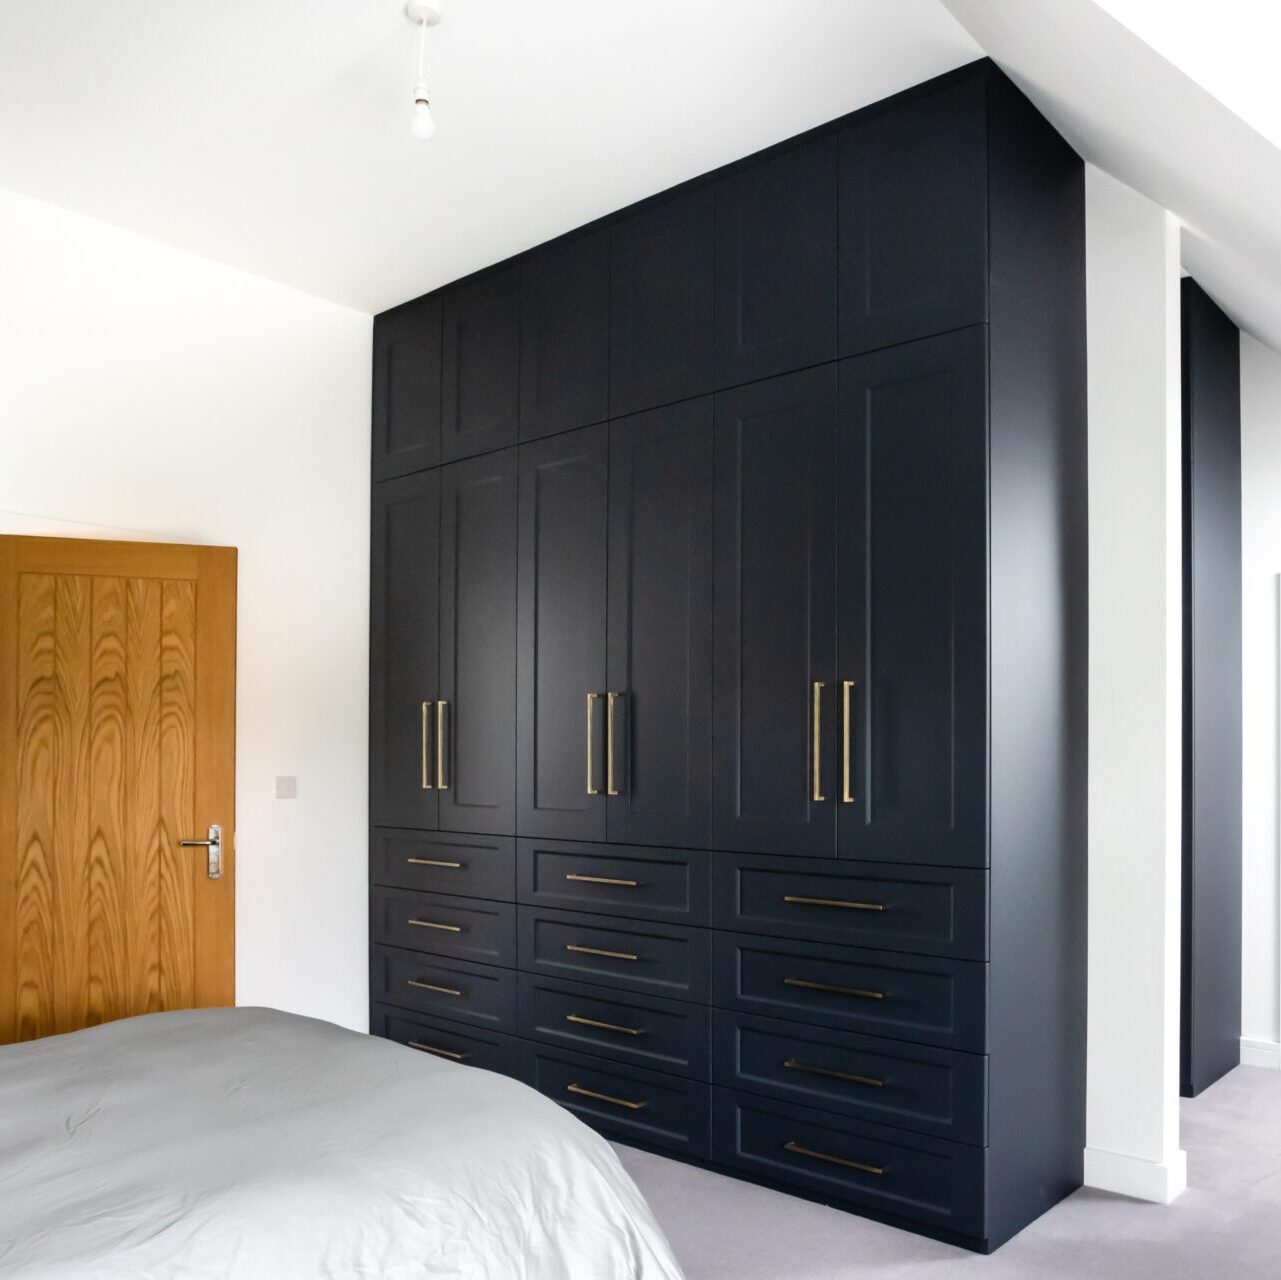 Image of fitted bedroom wardrobes